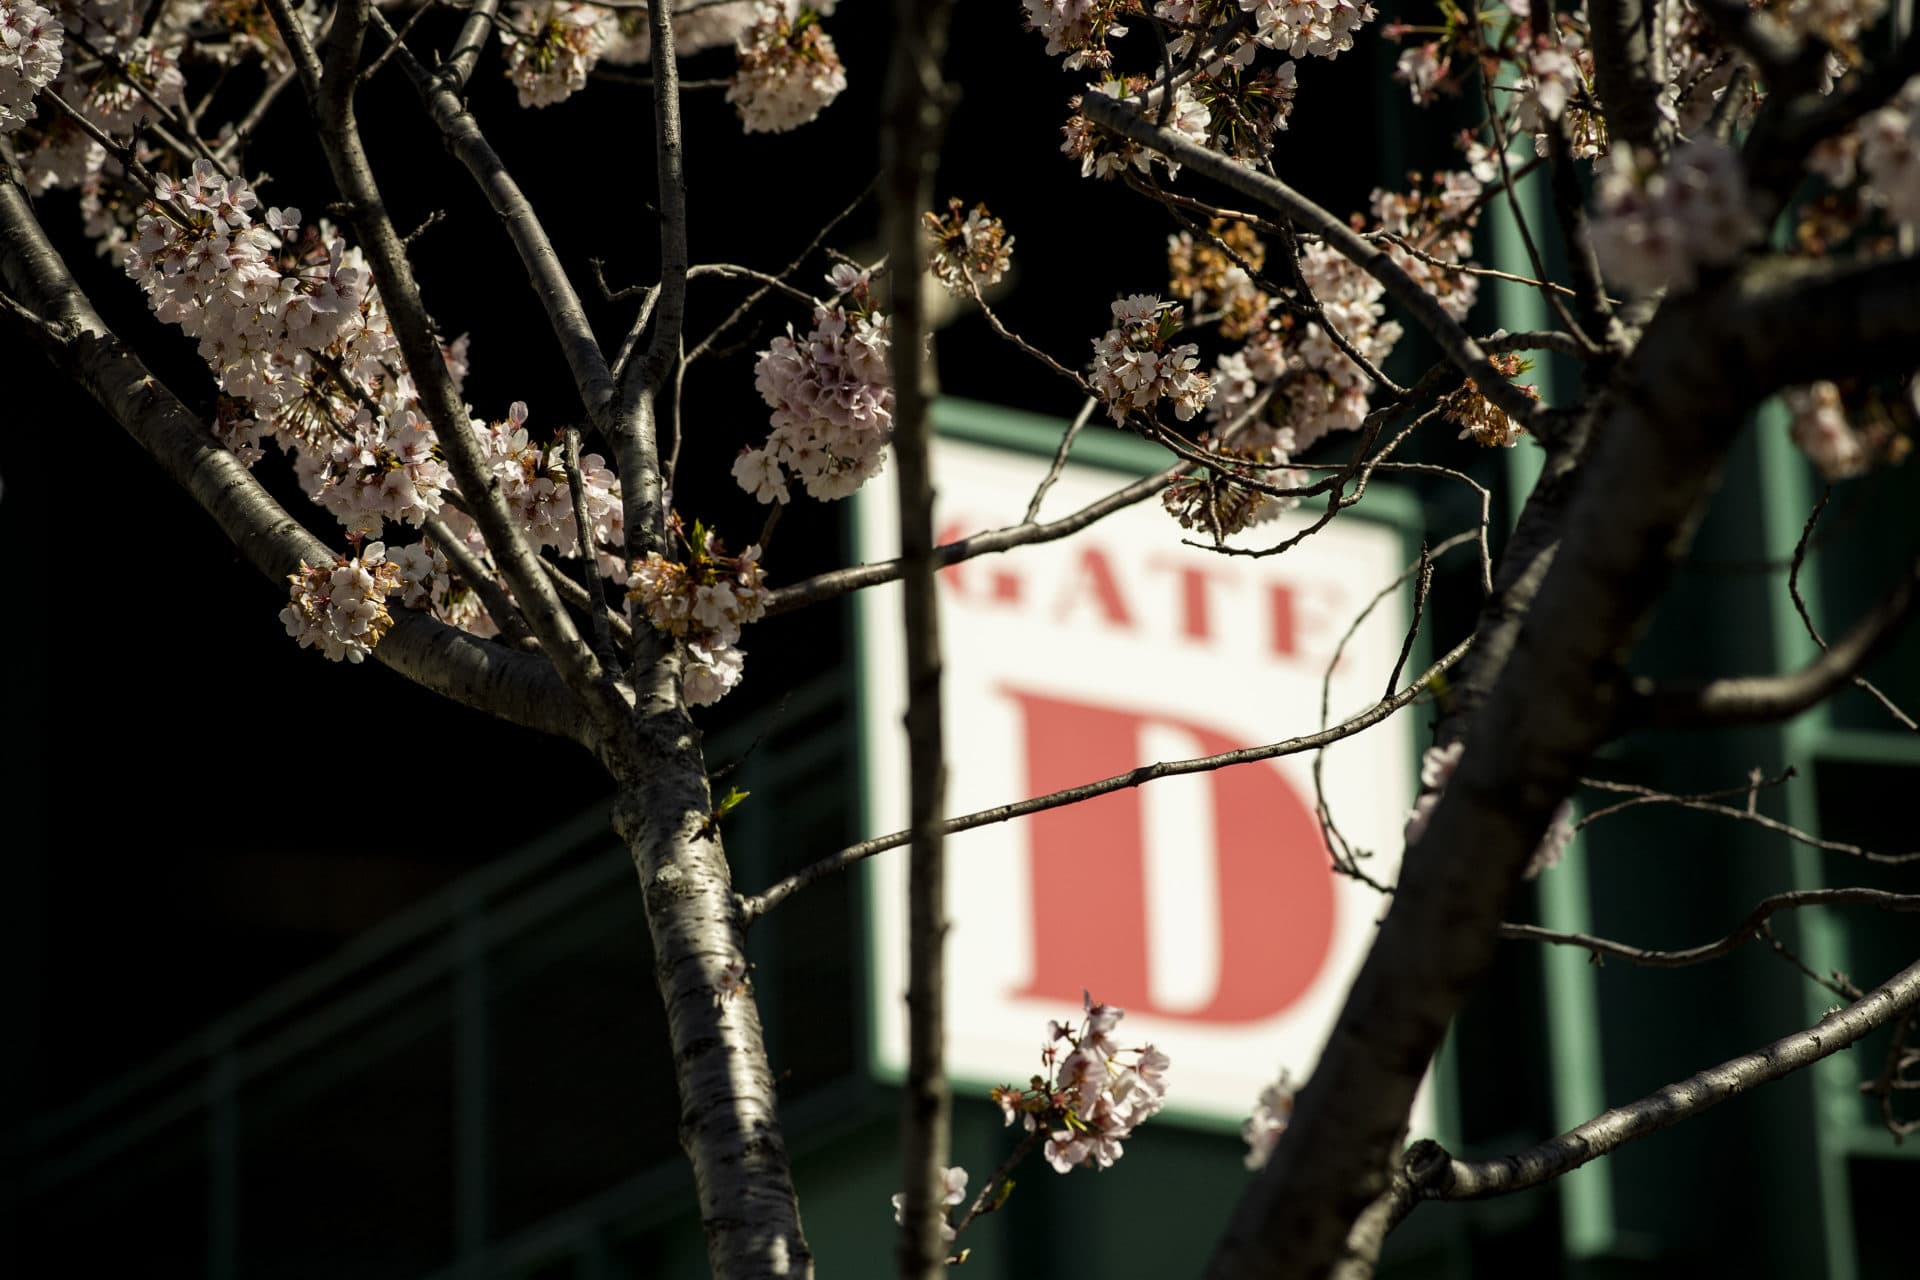 Cherry blossoms are seen before the 2022 opening day game between the Boston Red Sox and the Minnesota Twins on April 15 at Fenway Park. (Billie Weiss/Boston Red Sox/Getty Images)